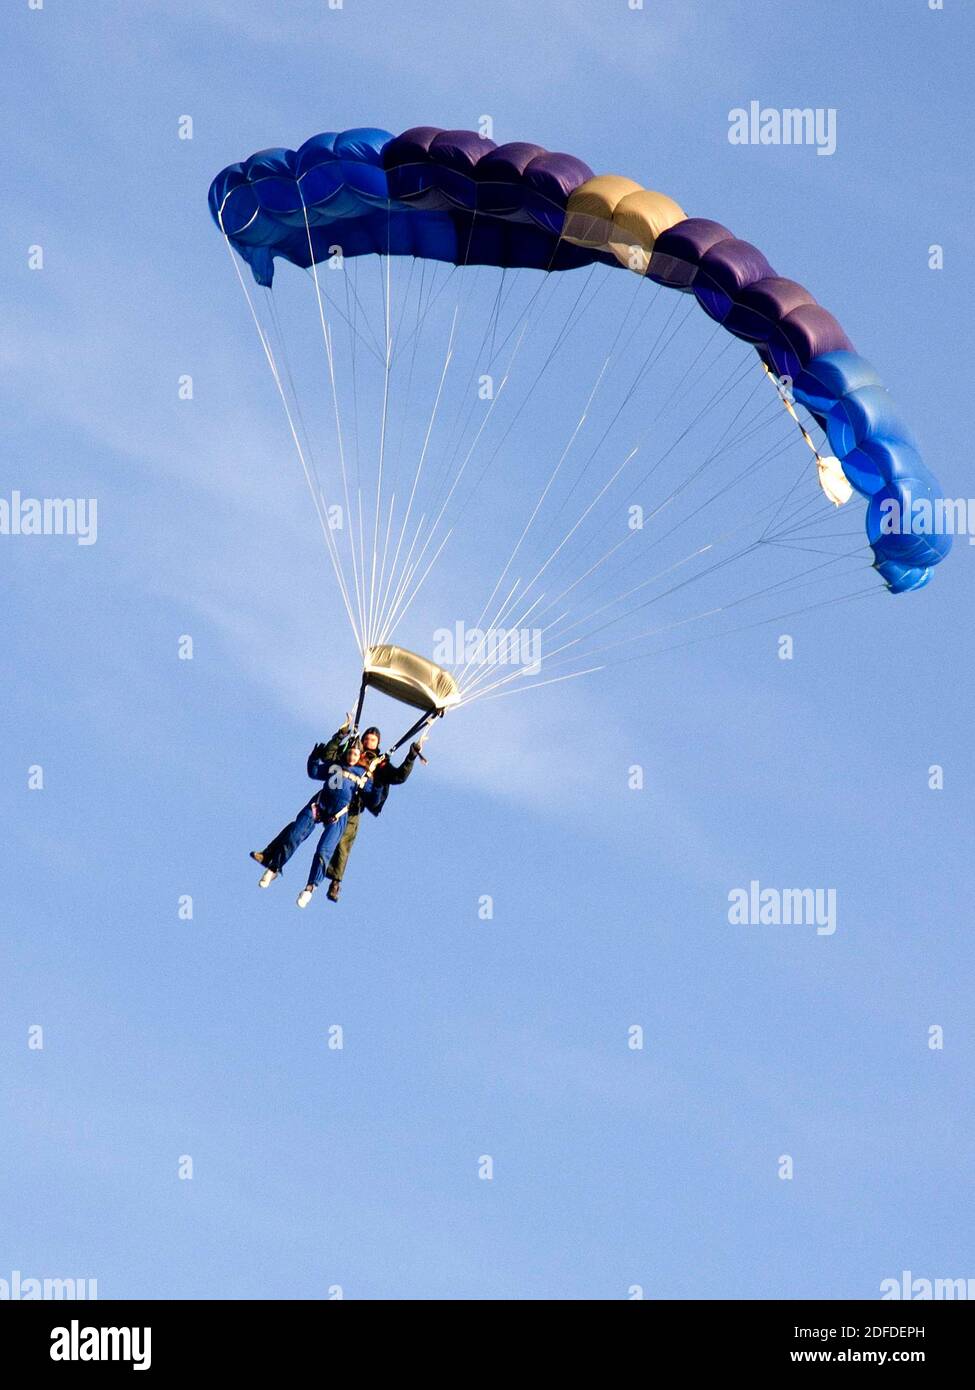 Tandem parachute jump for charity Stock Photo